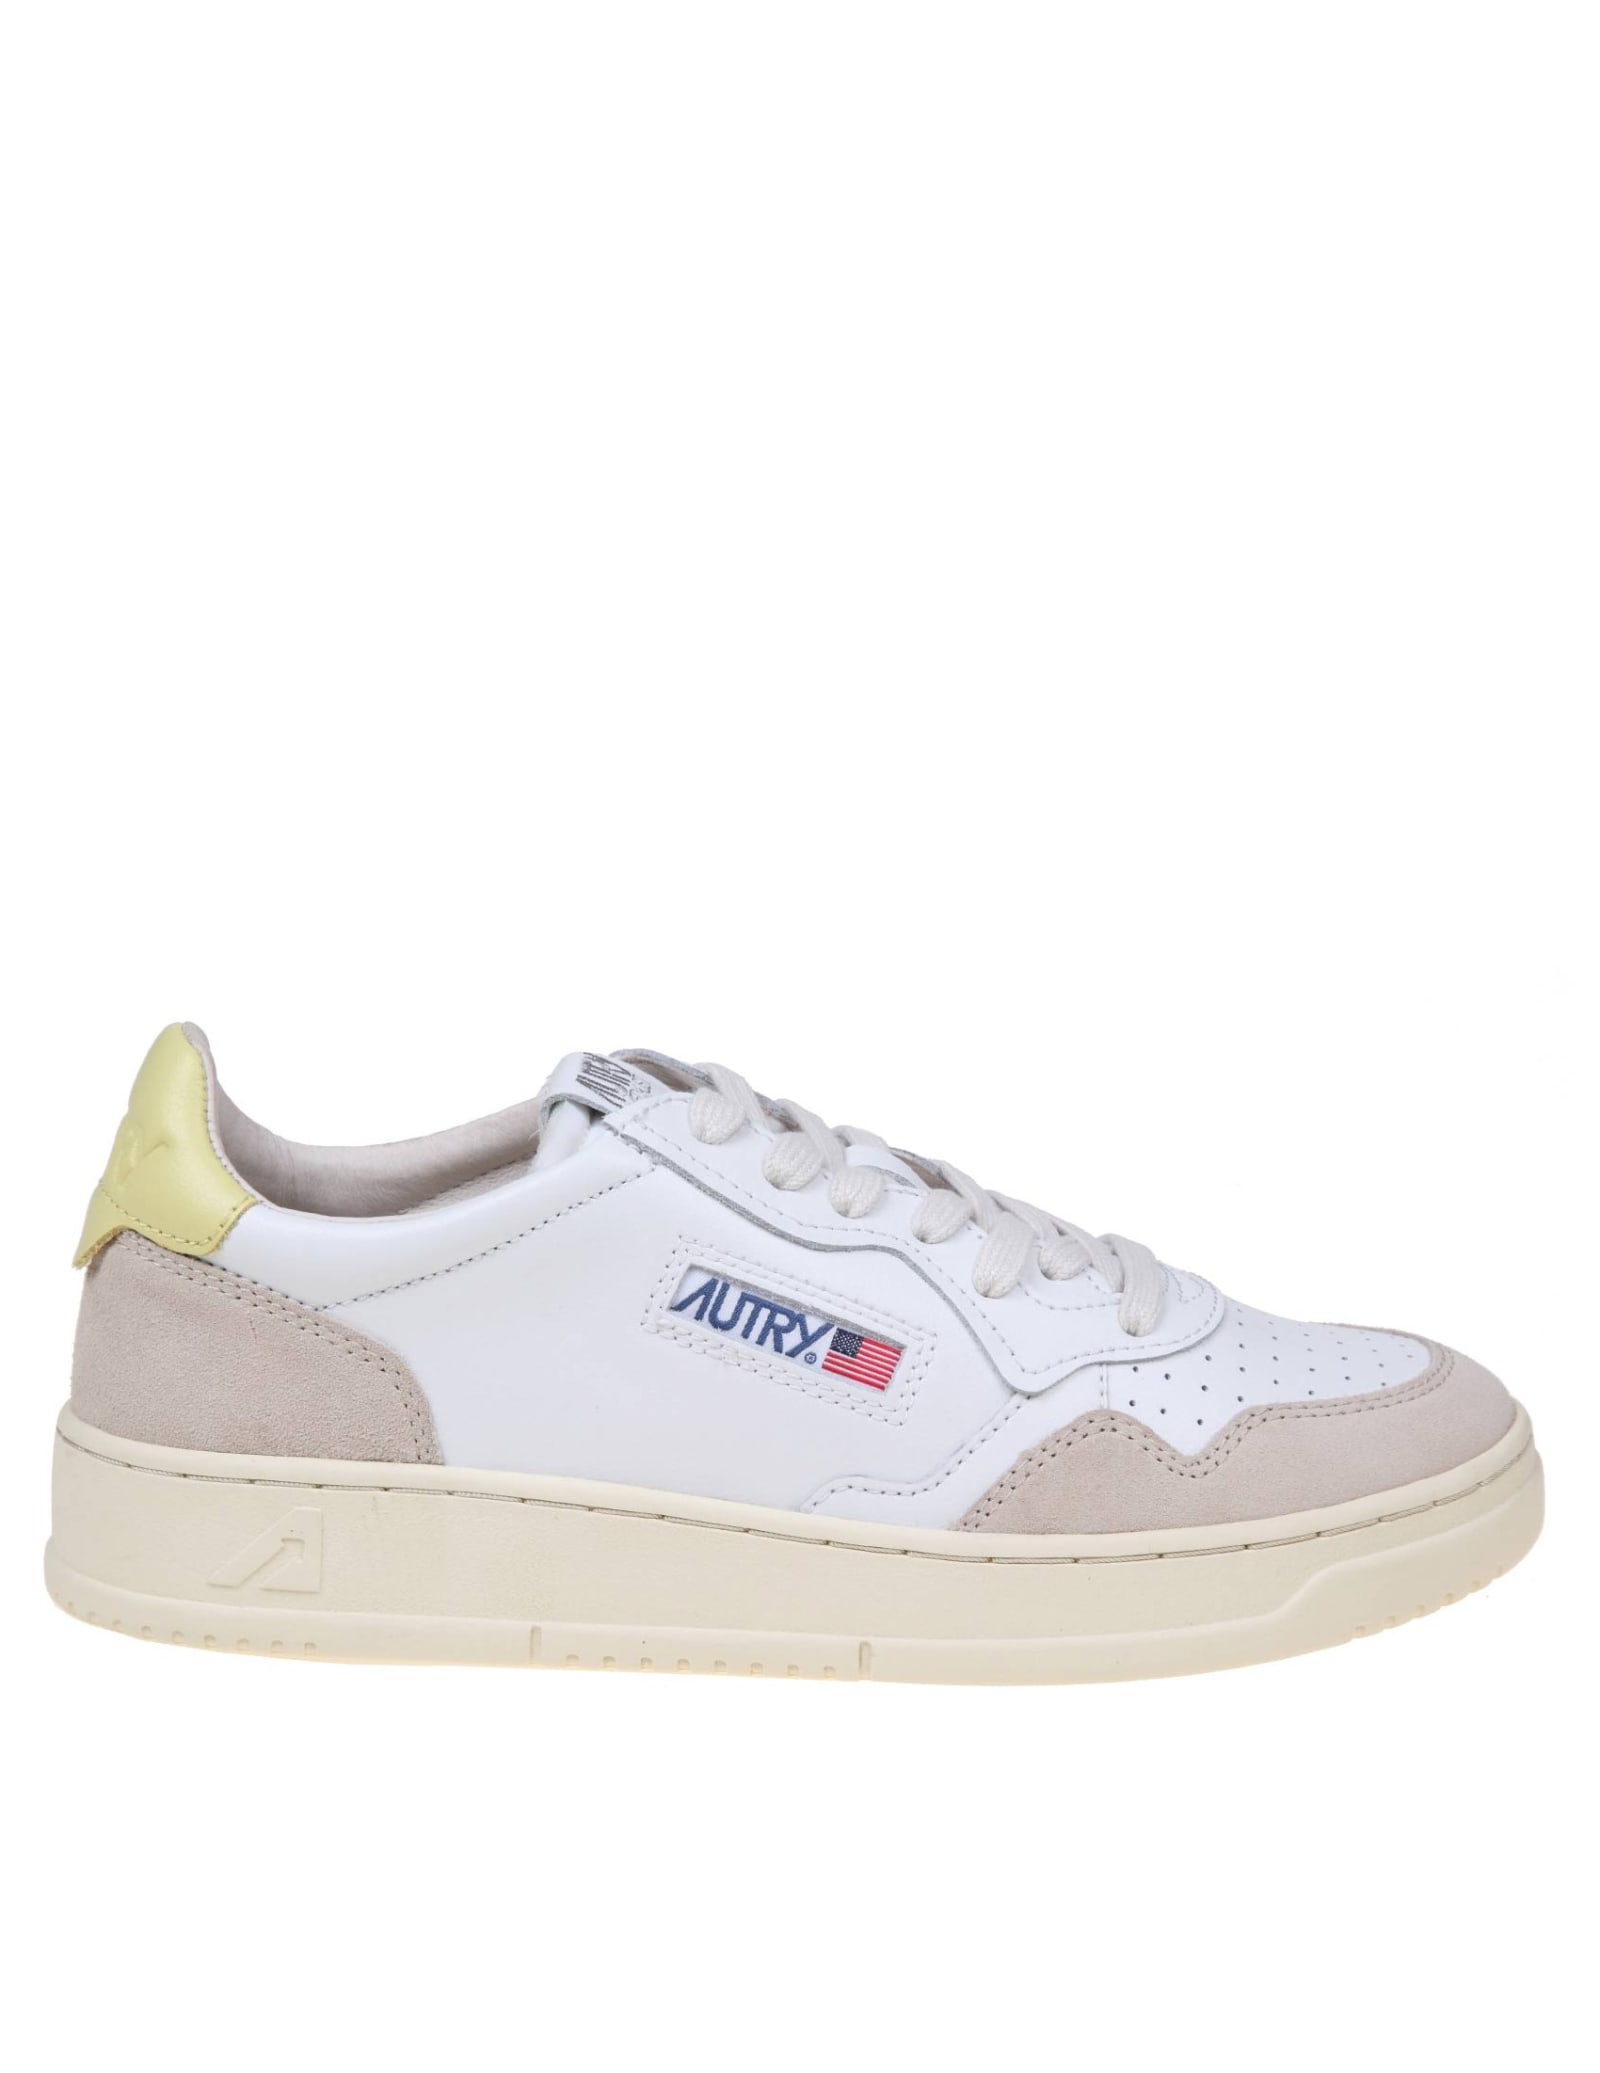 Shop Autry Sneakers In White And Yellow Leather And Suede